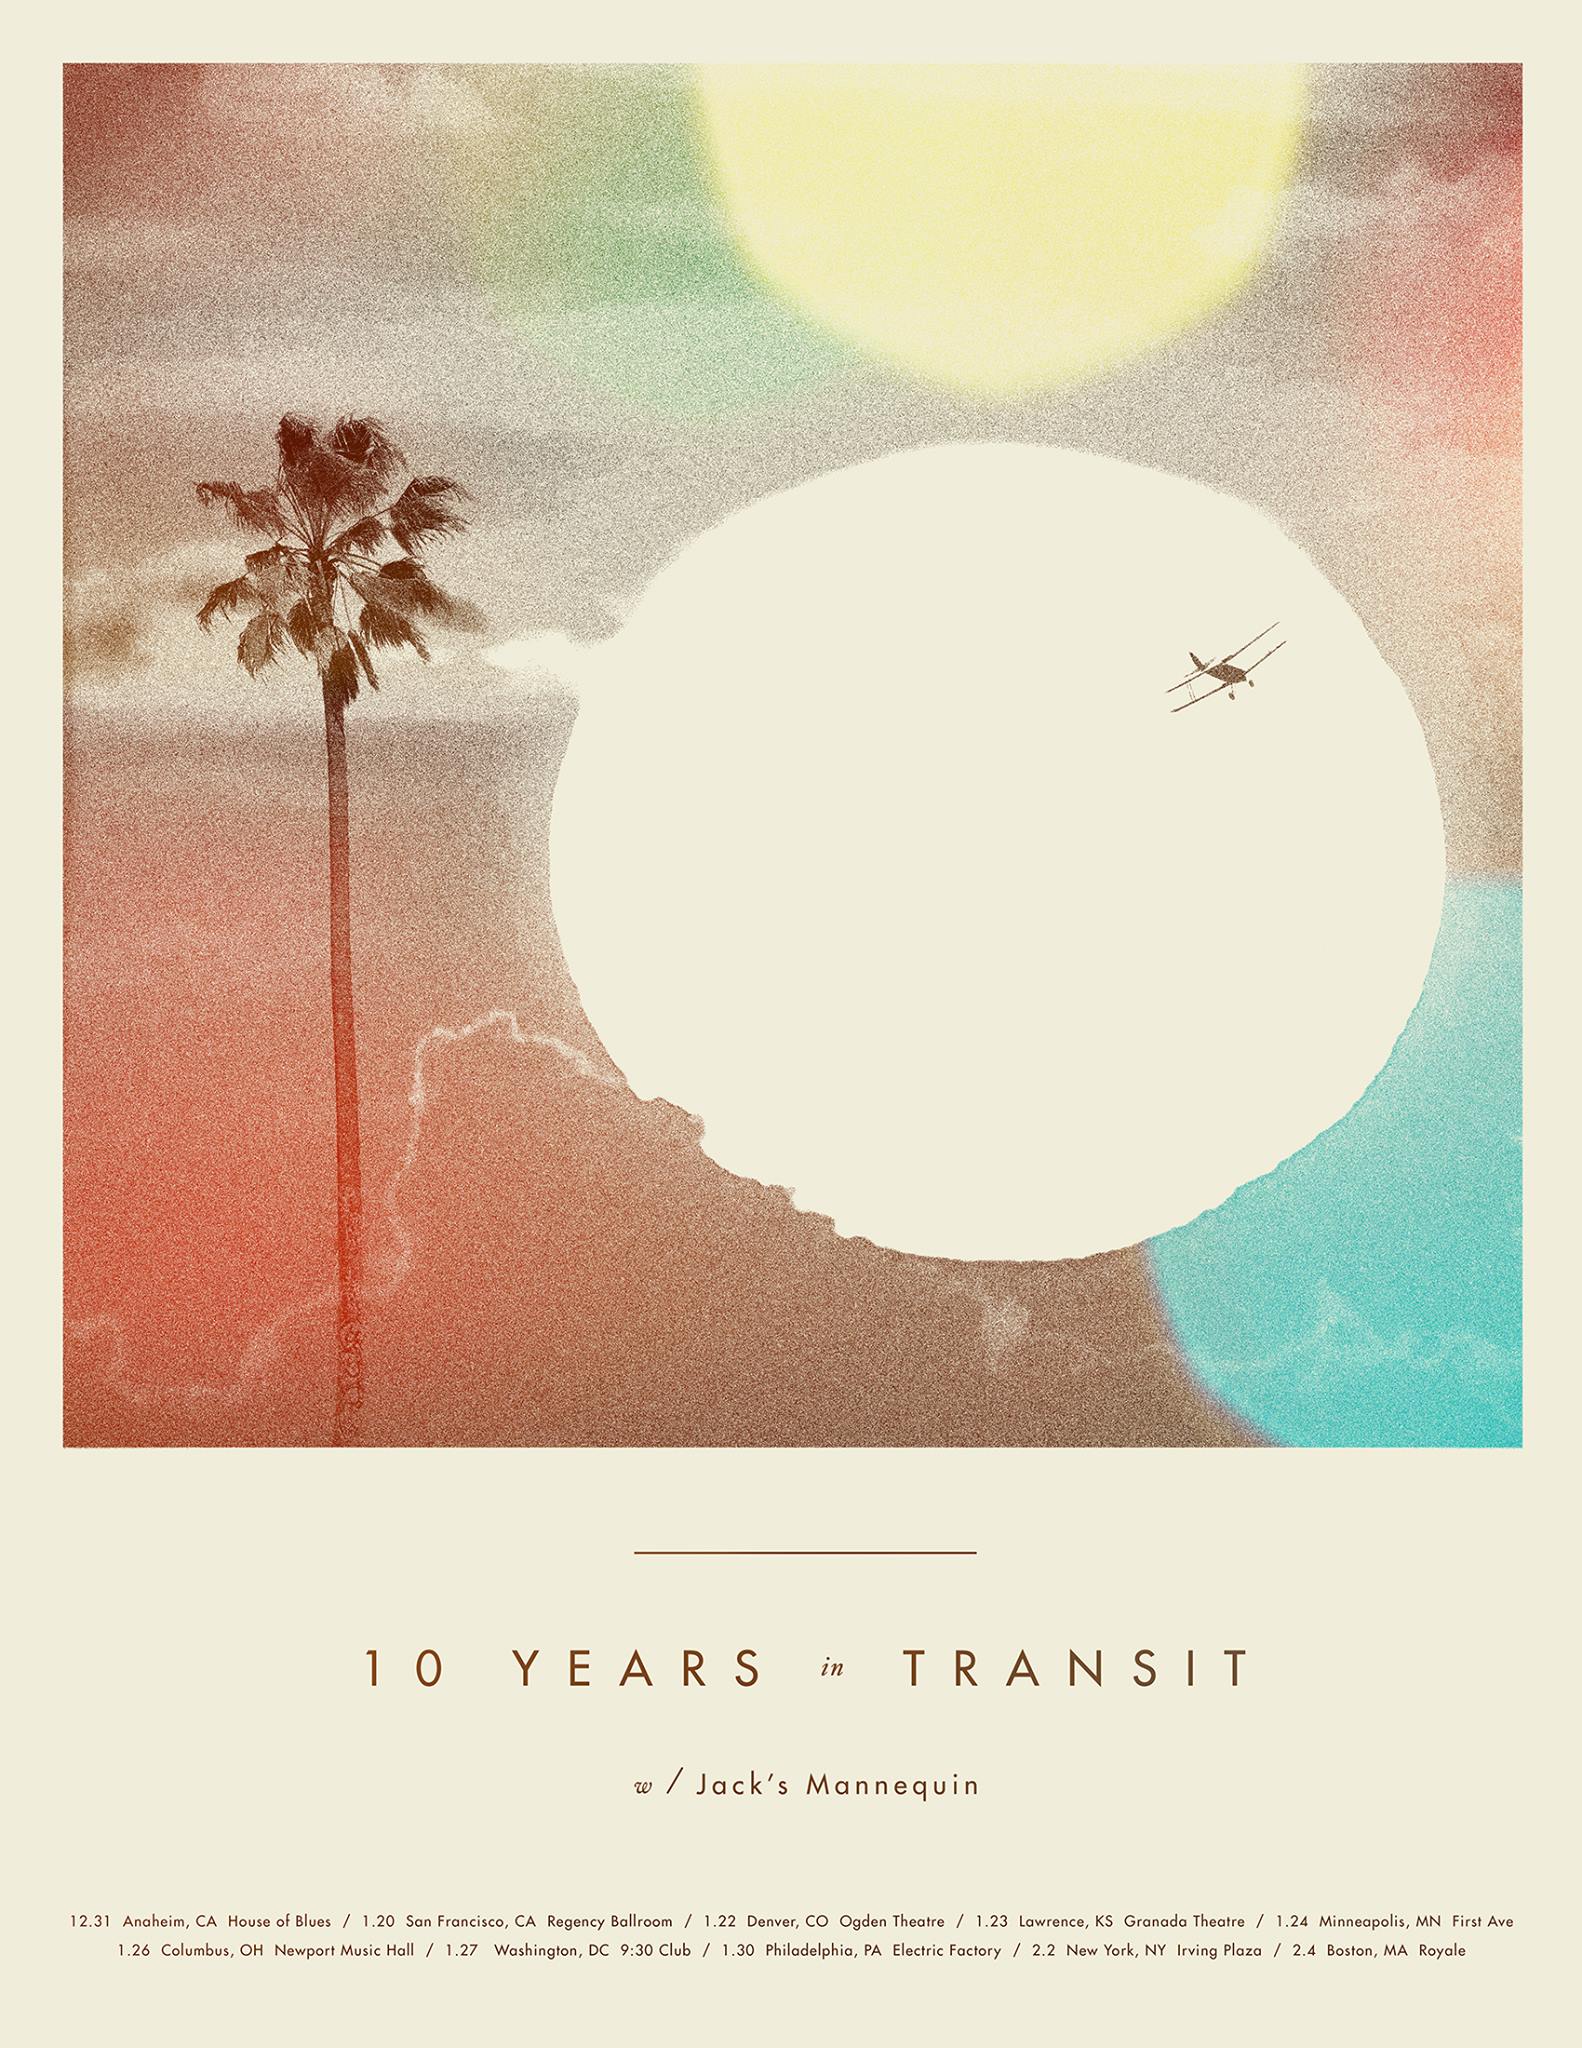 East Coast Tickets for Jack's Mannequin 10 Years in Transit On Sale NOW!